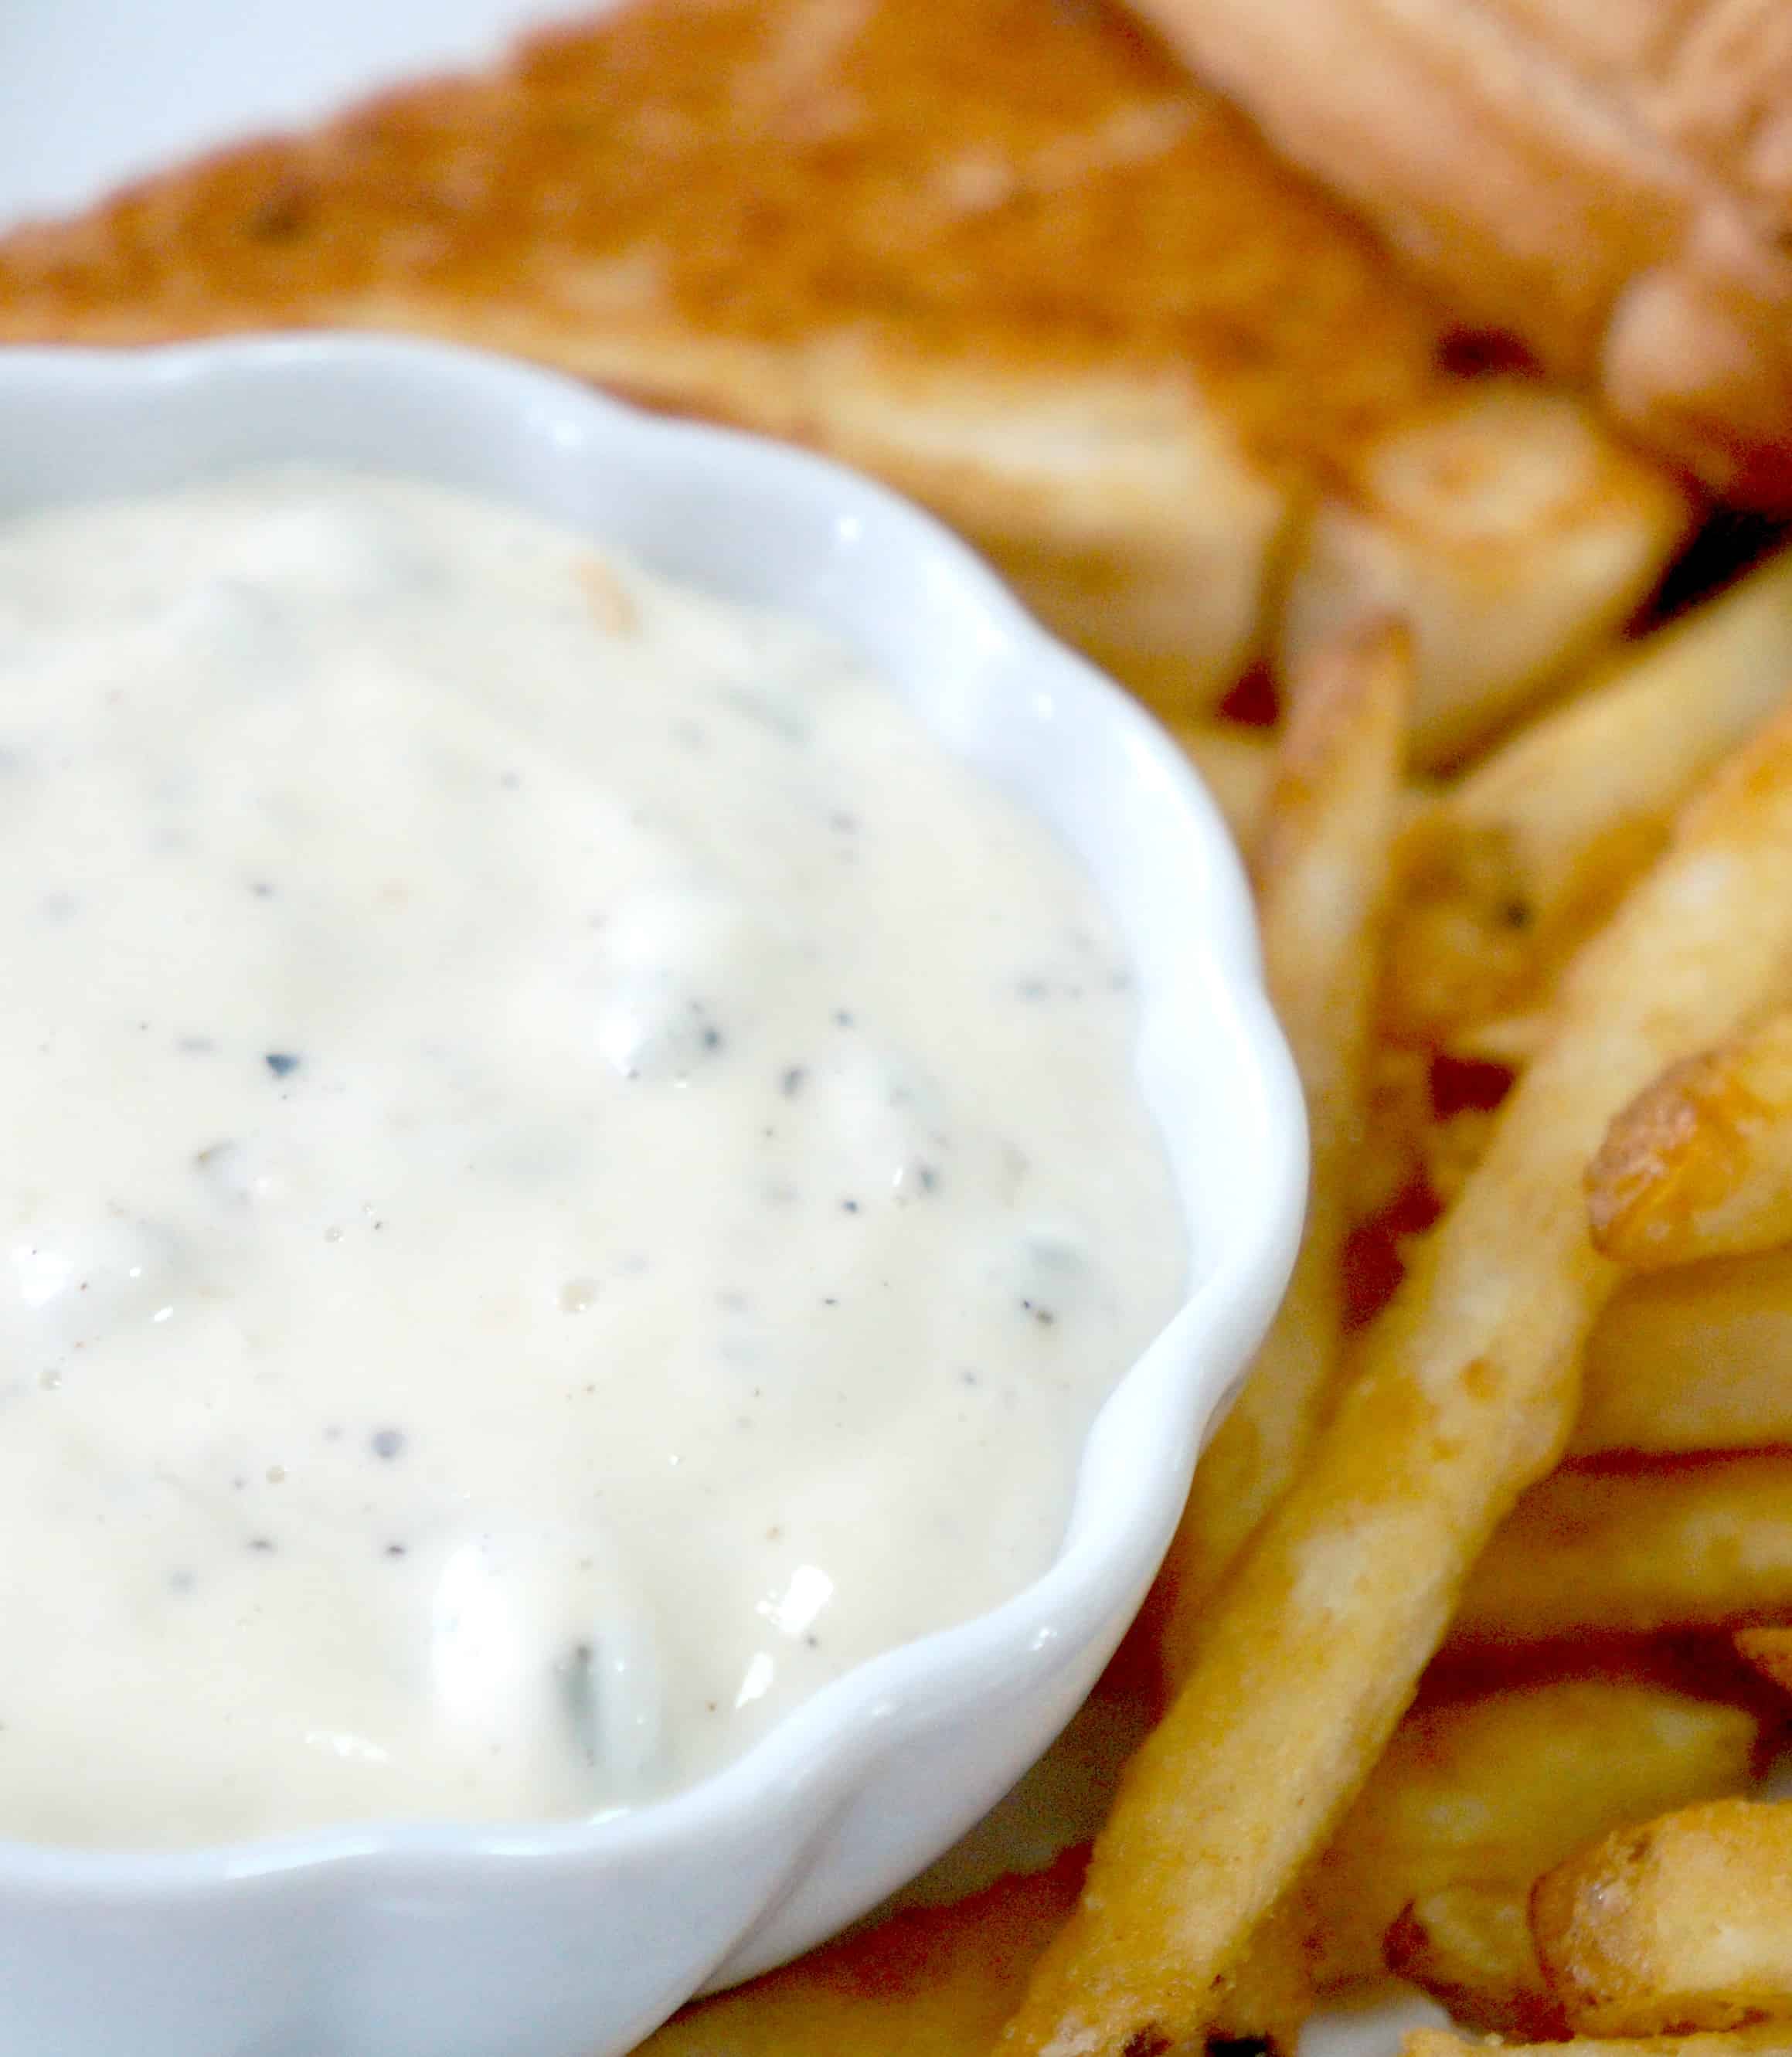 French fry dipping sauce